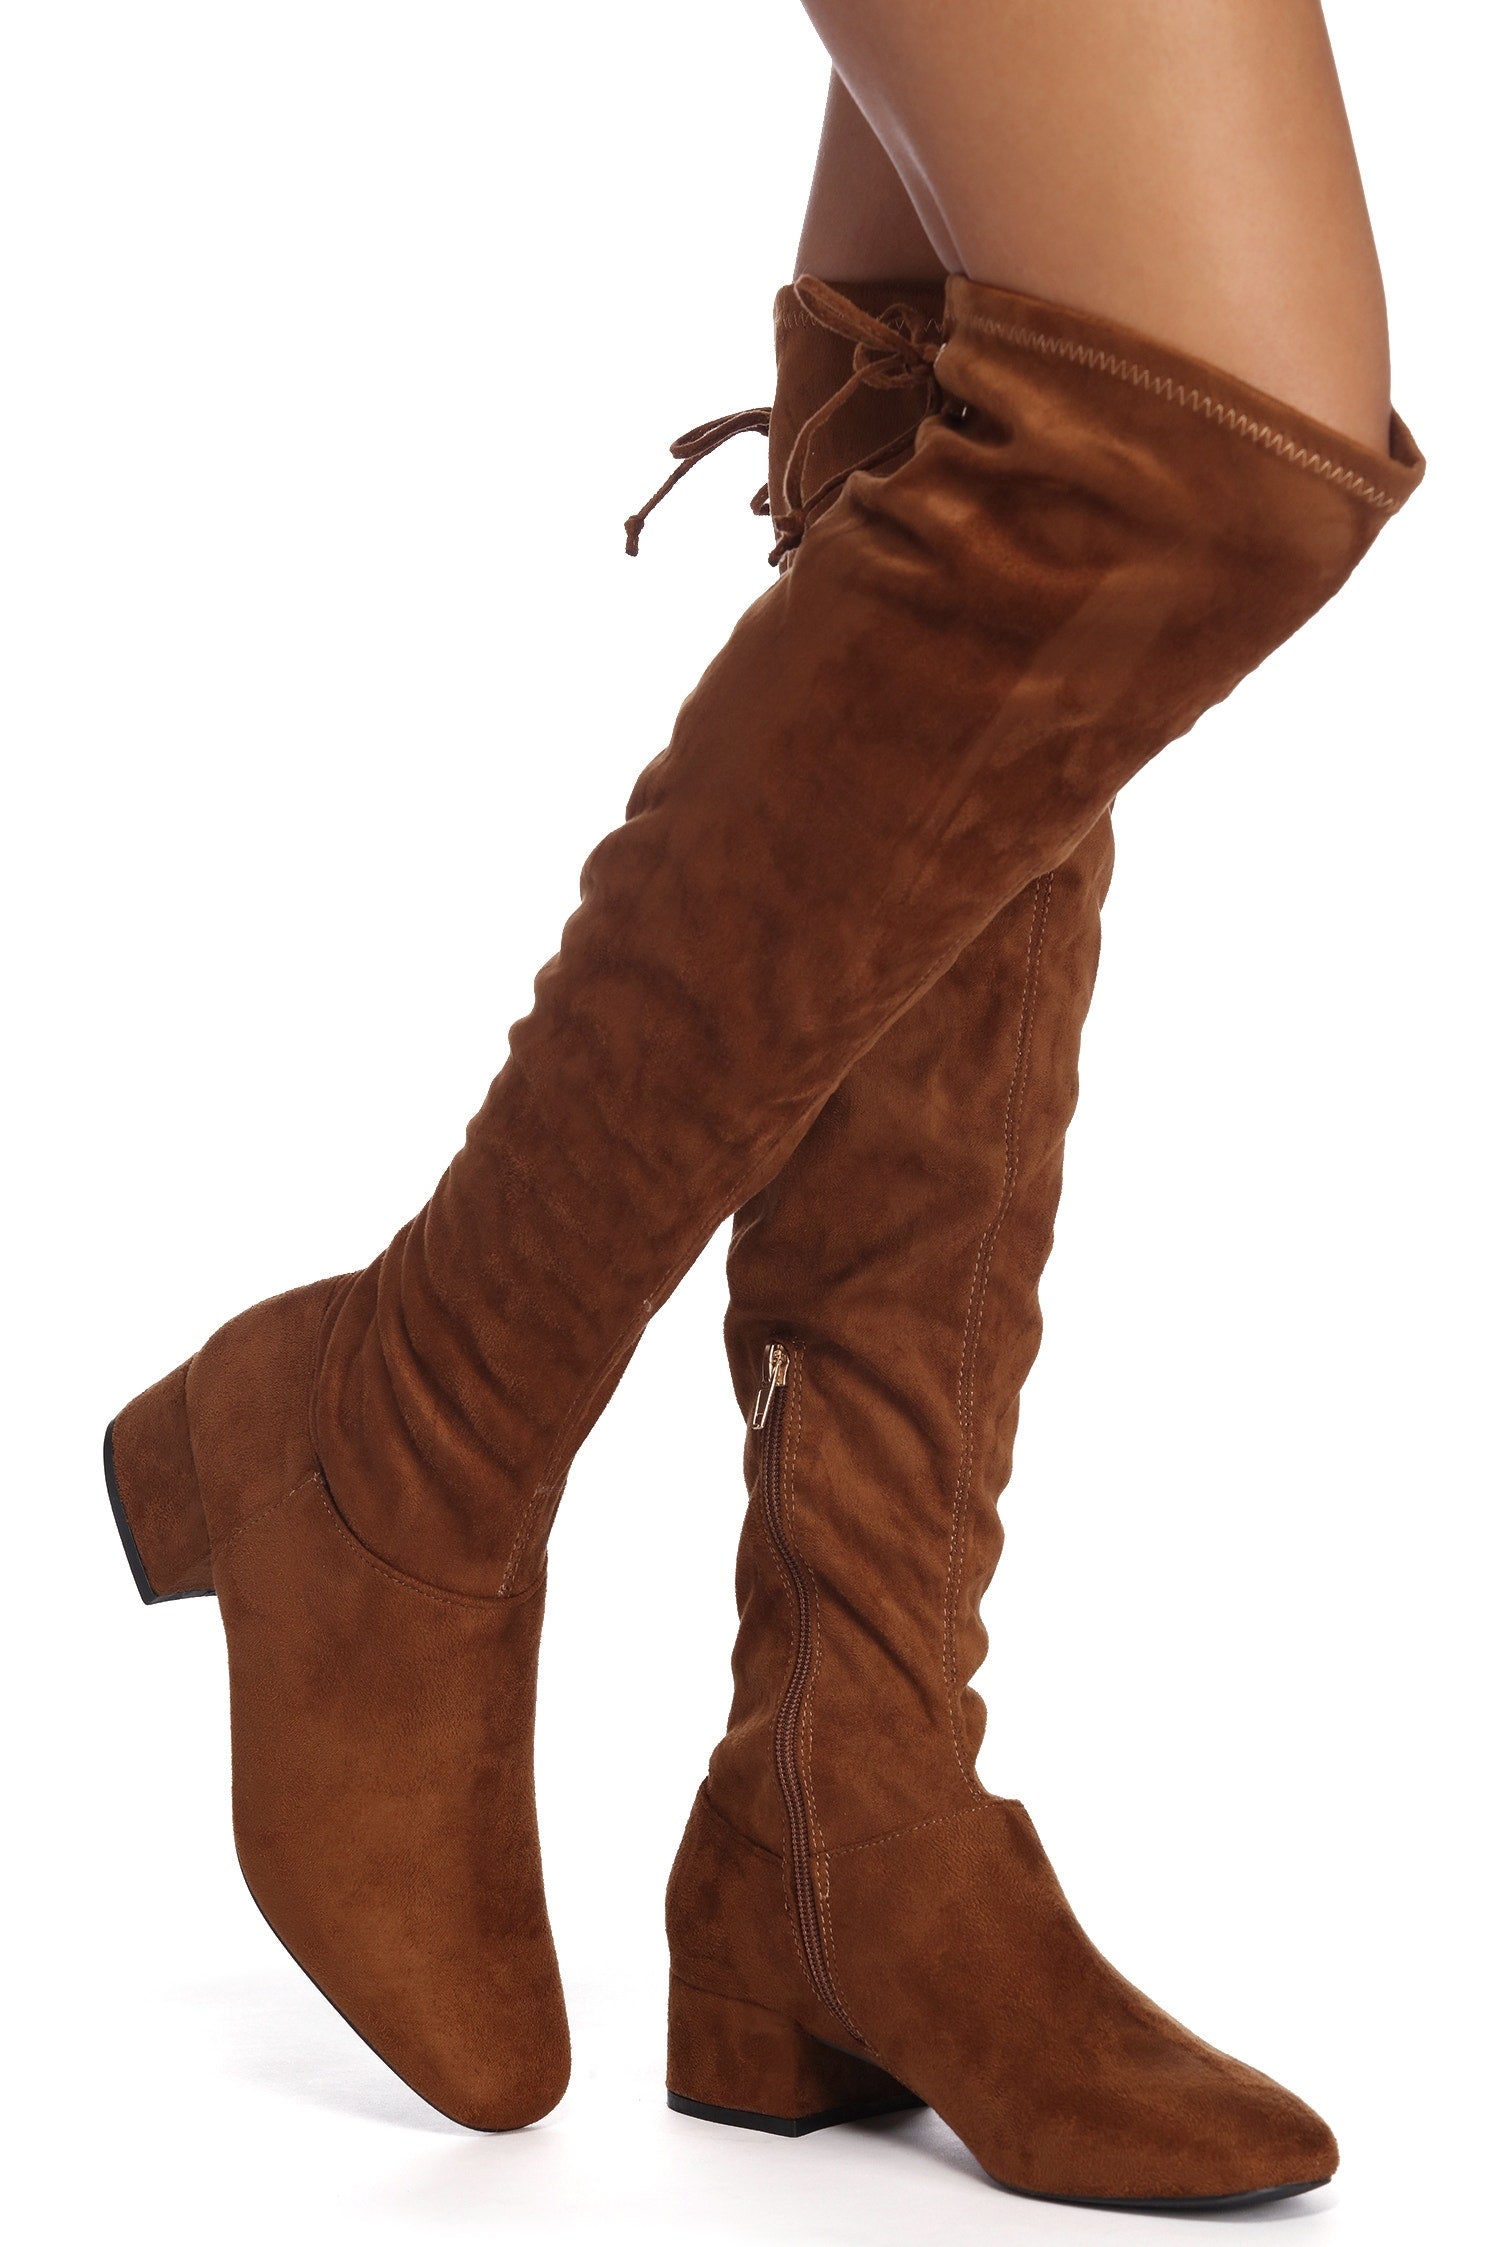 Get Low Faux Suede Boots